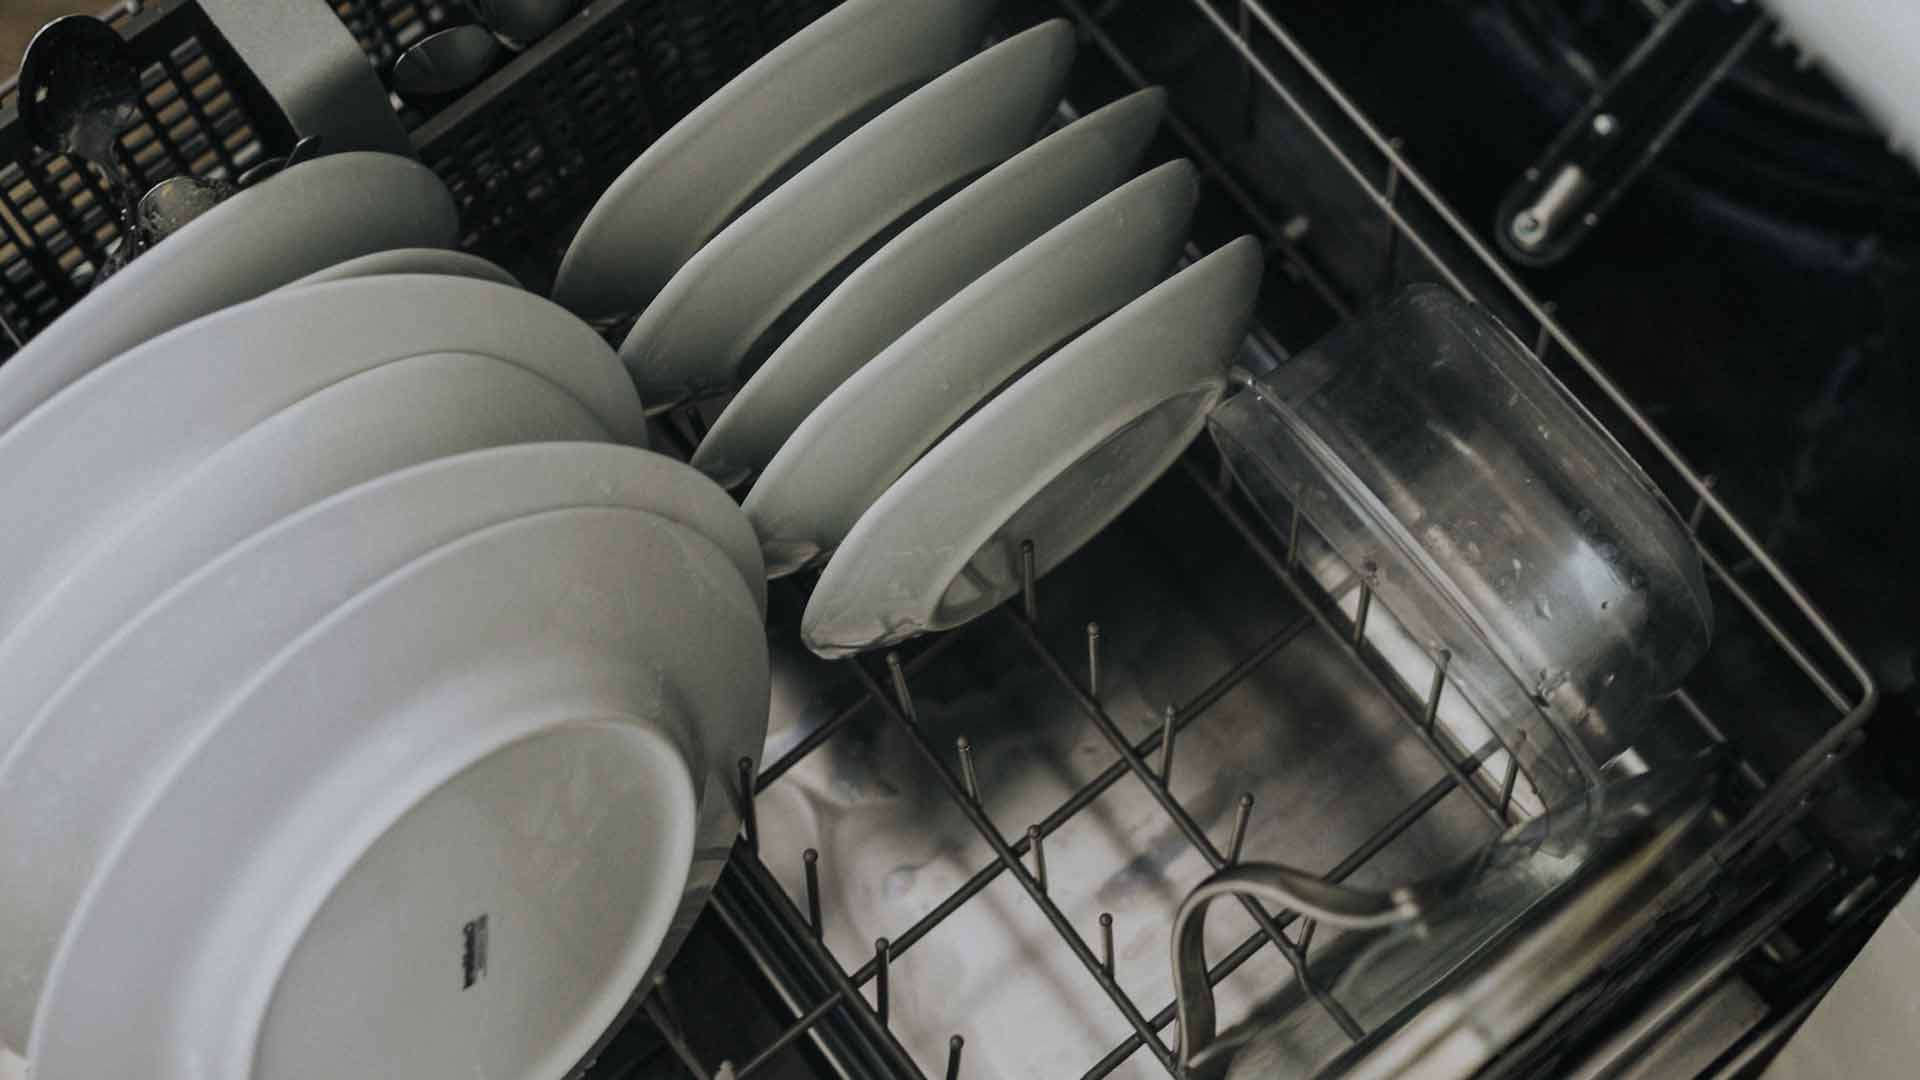 10 common Dishwasher questions